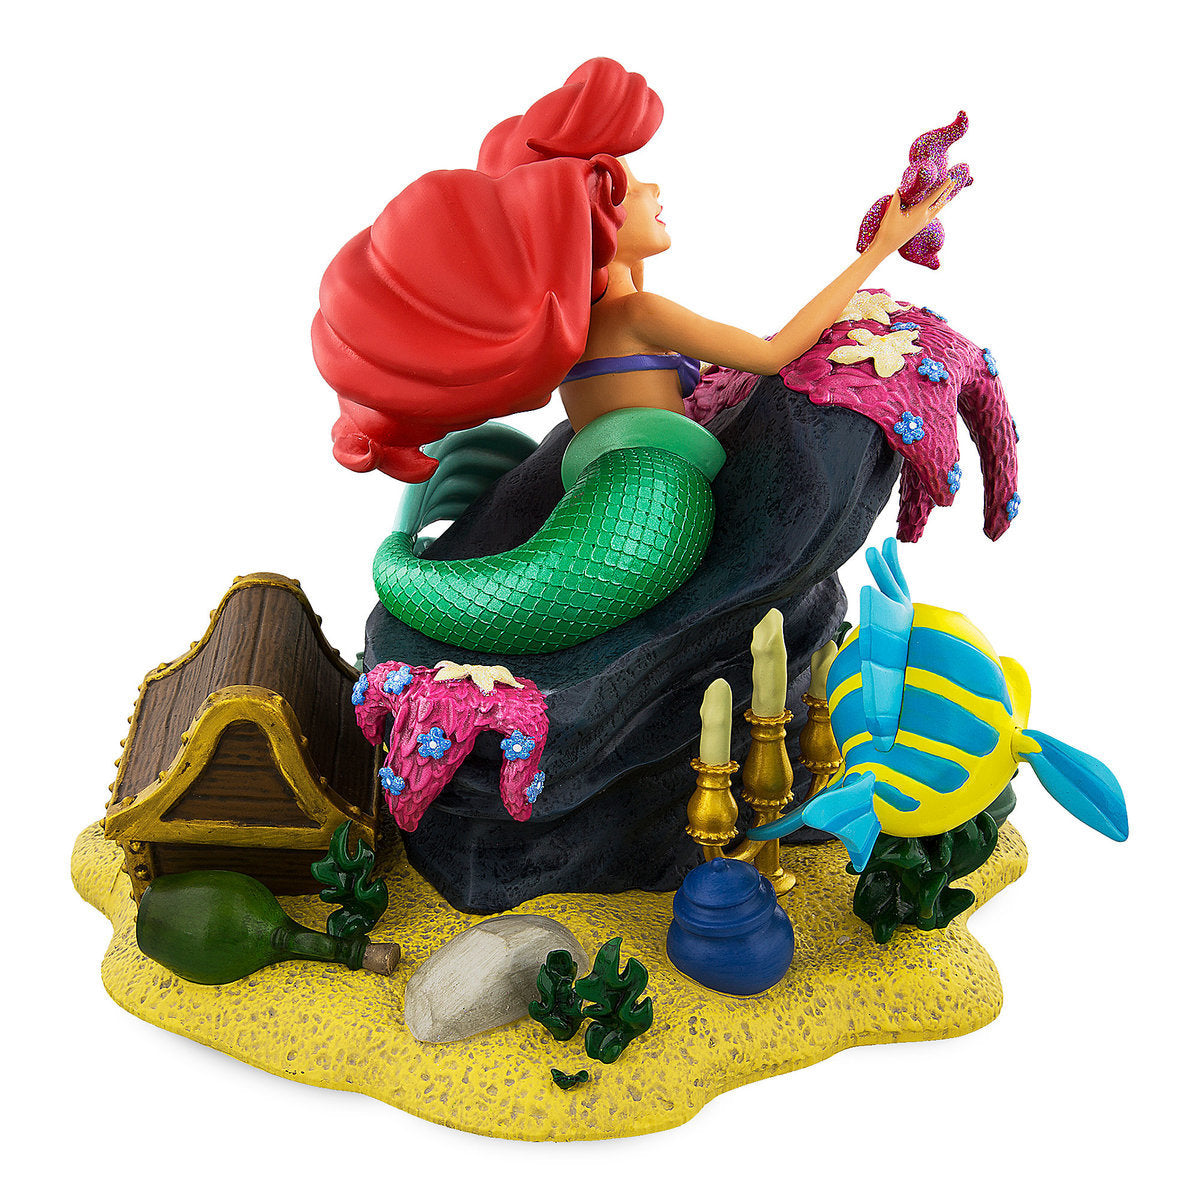 Disney Parks Ariel and Friends Resin Figurine Statue New with Box